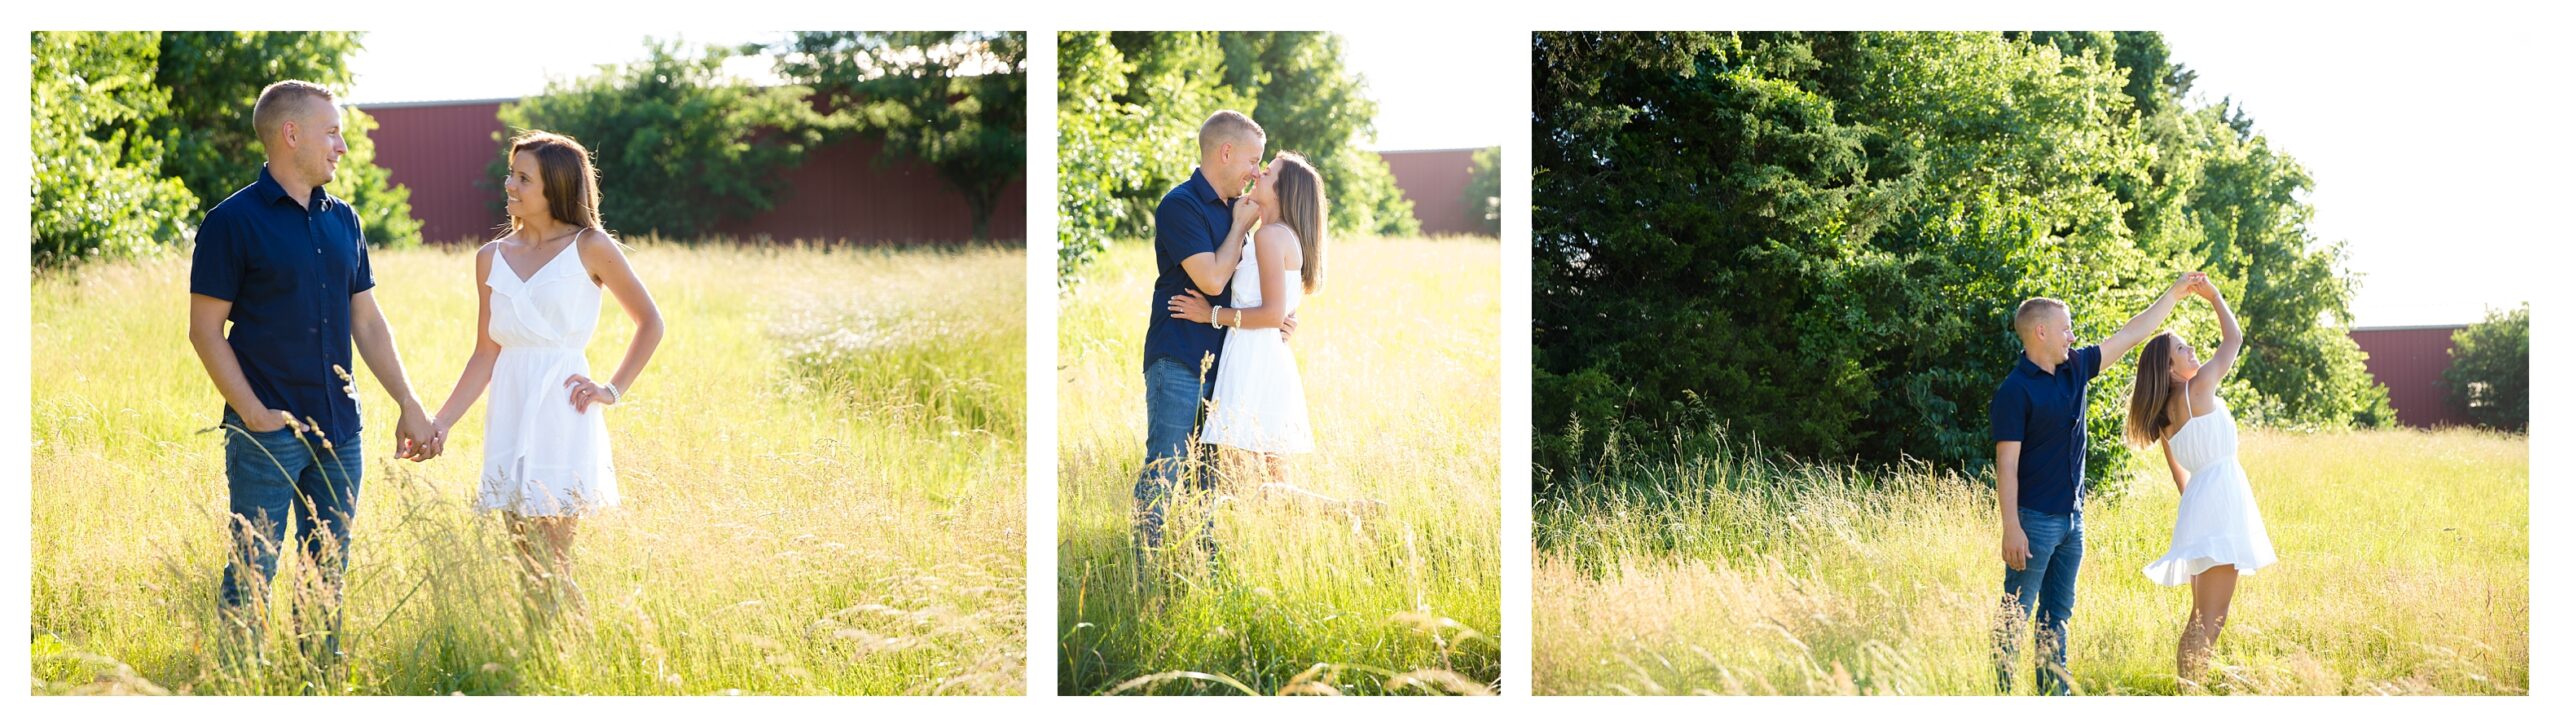 strawberry Hill Farms engagement photography session Columbia MO